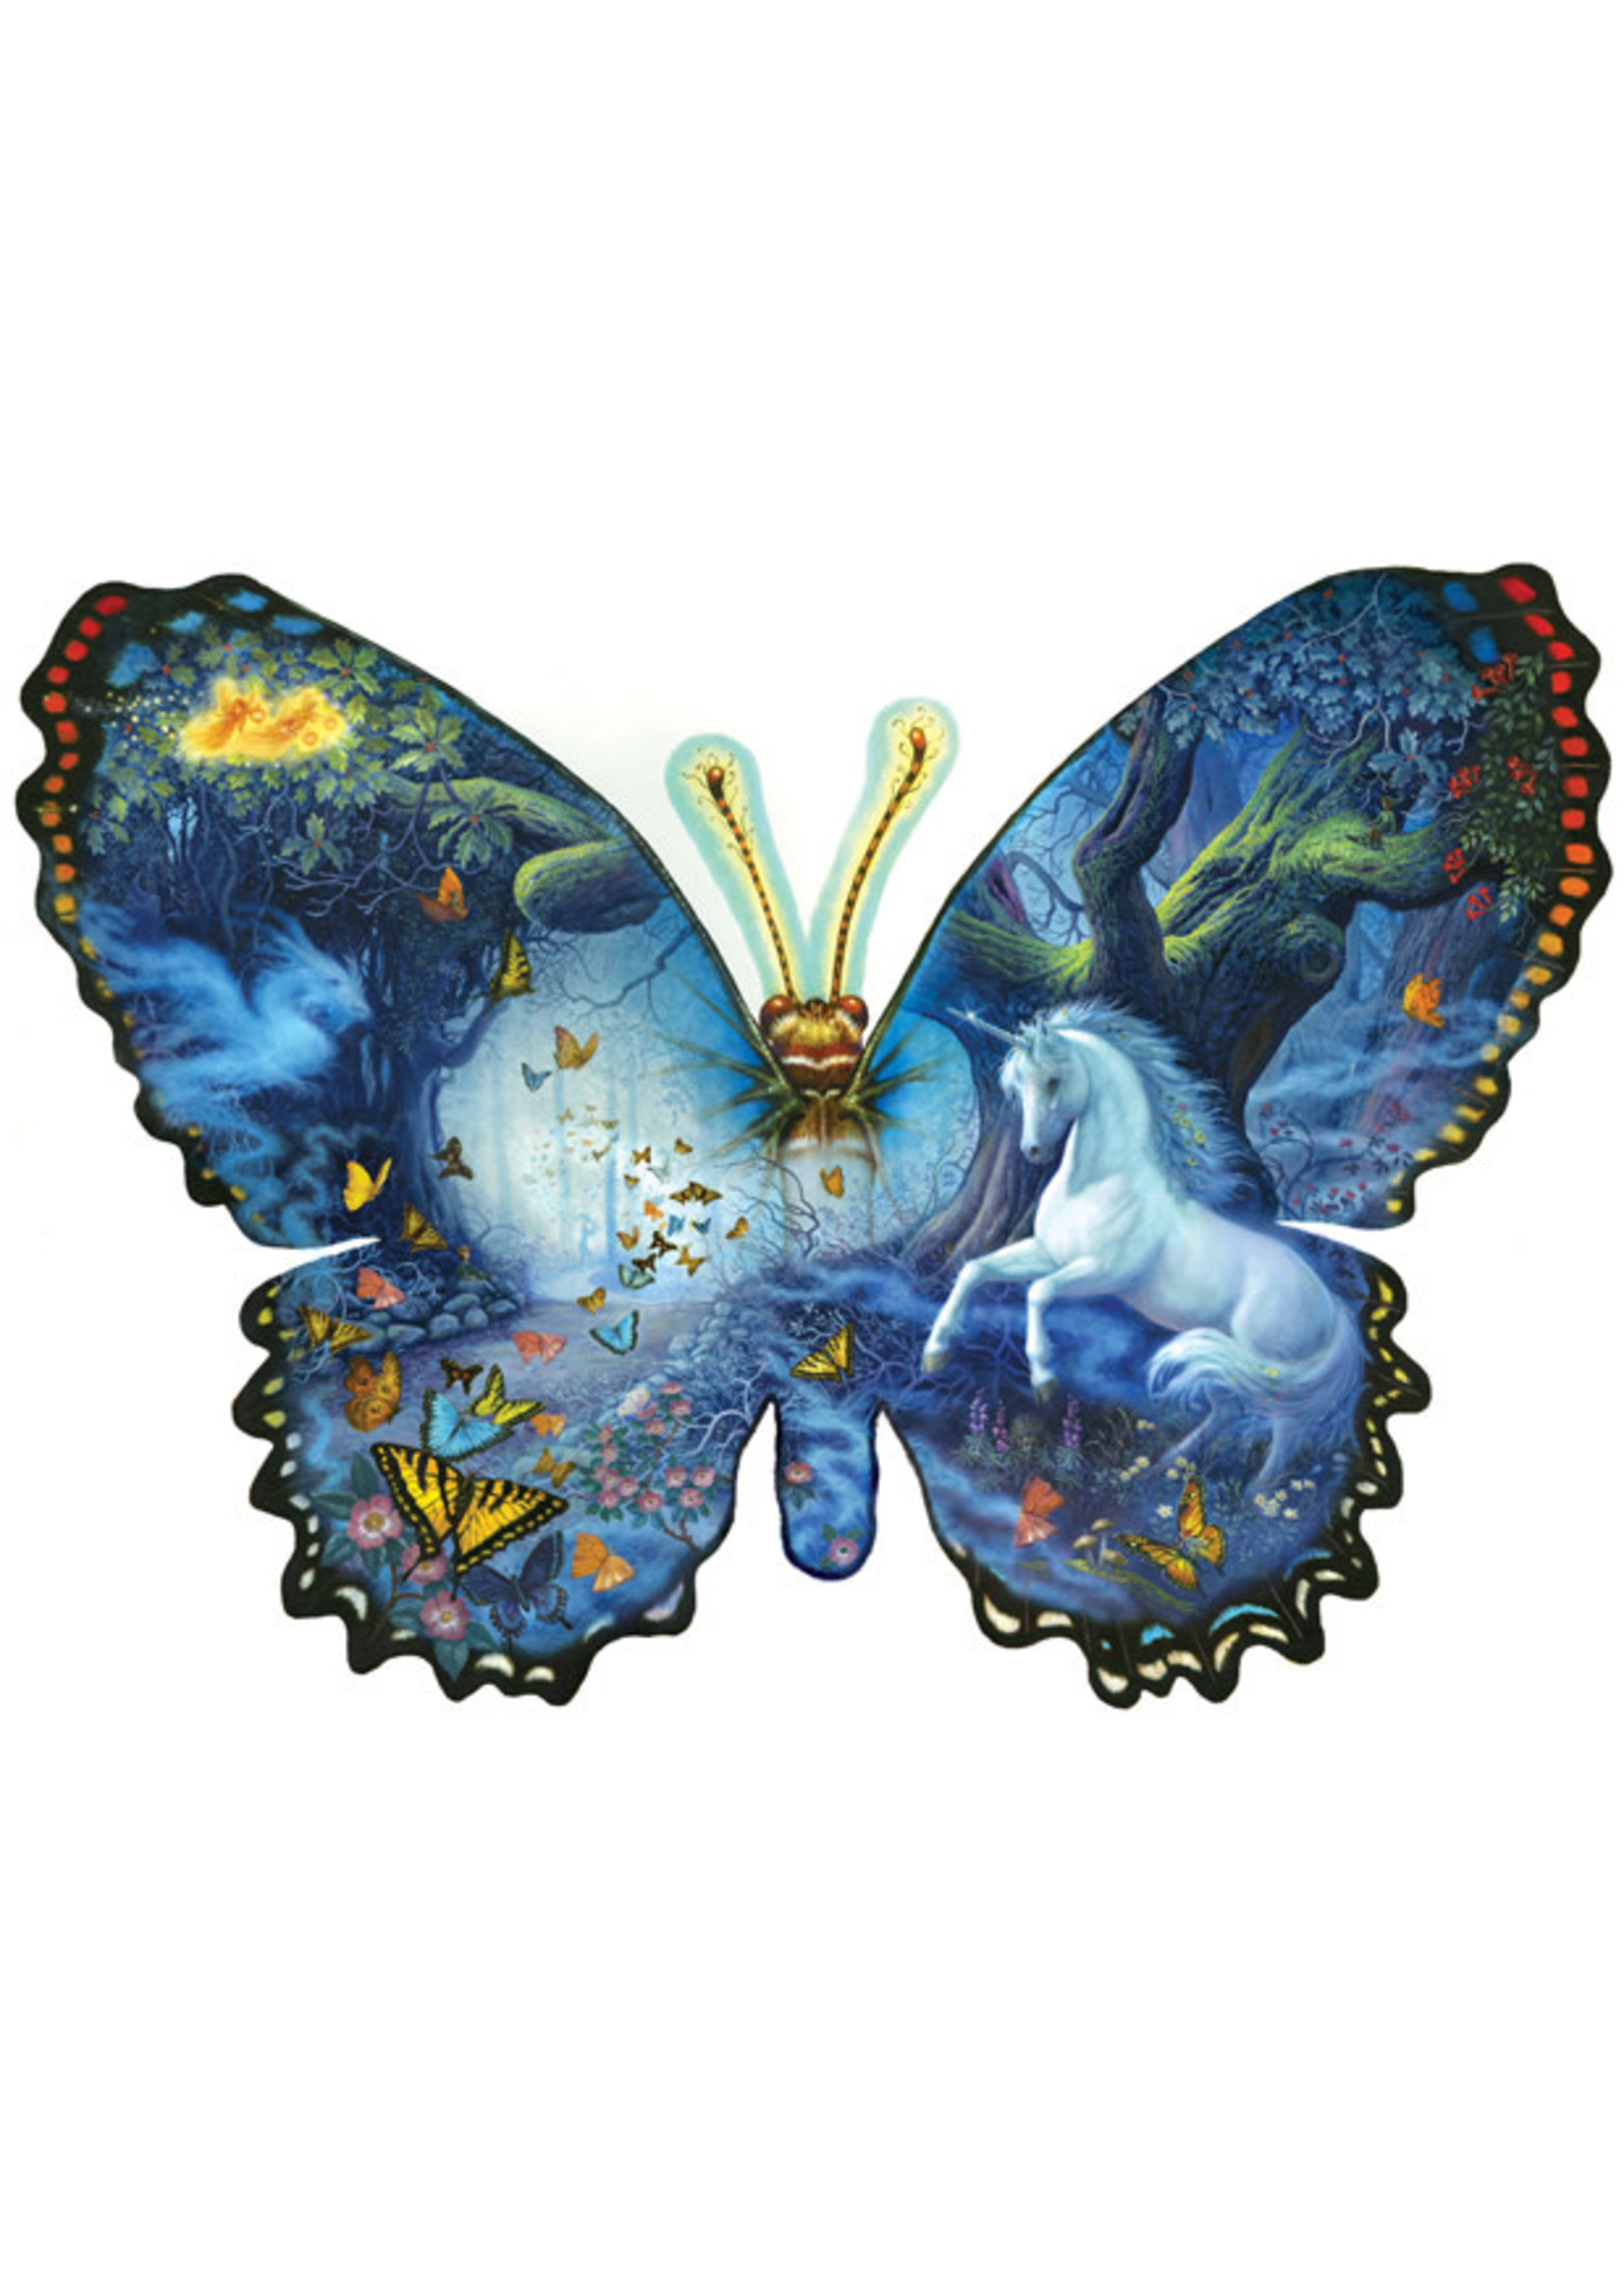 Sunsout Fantasy Butterfly Special Shaped Puzzle 1000 Pieces